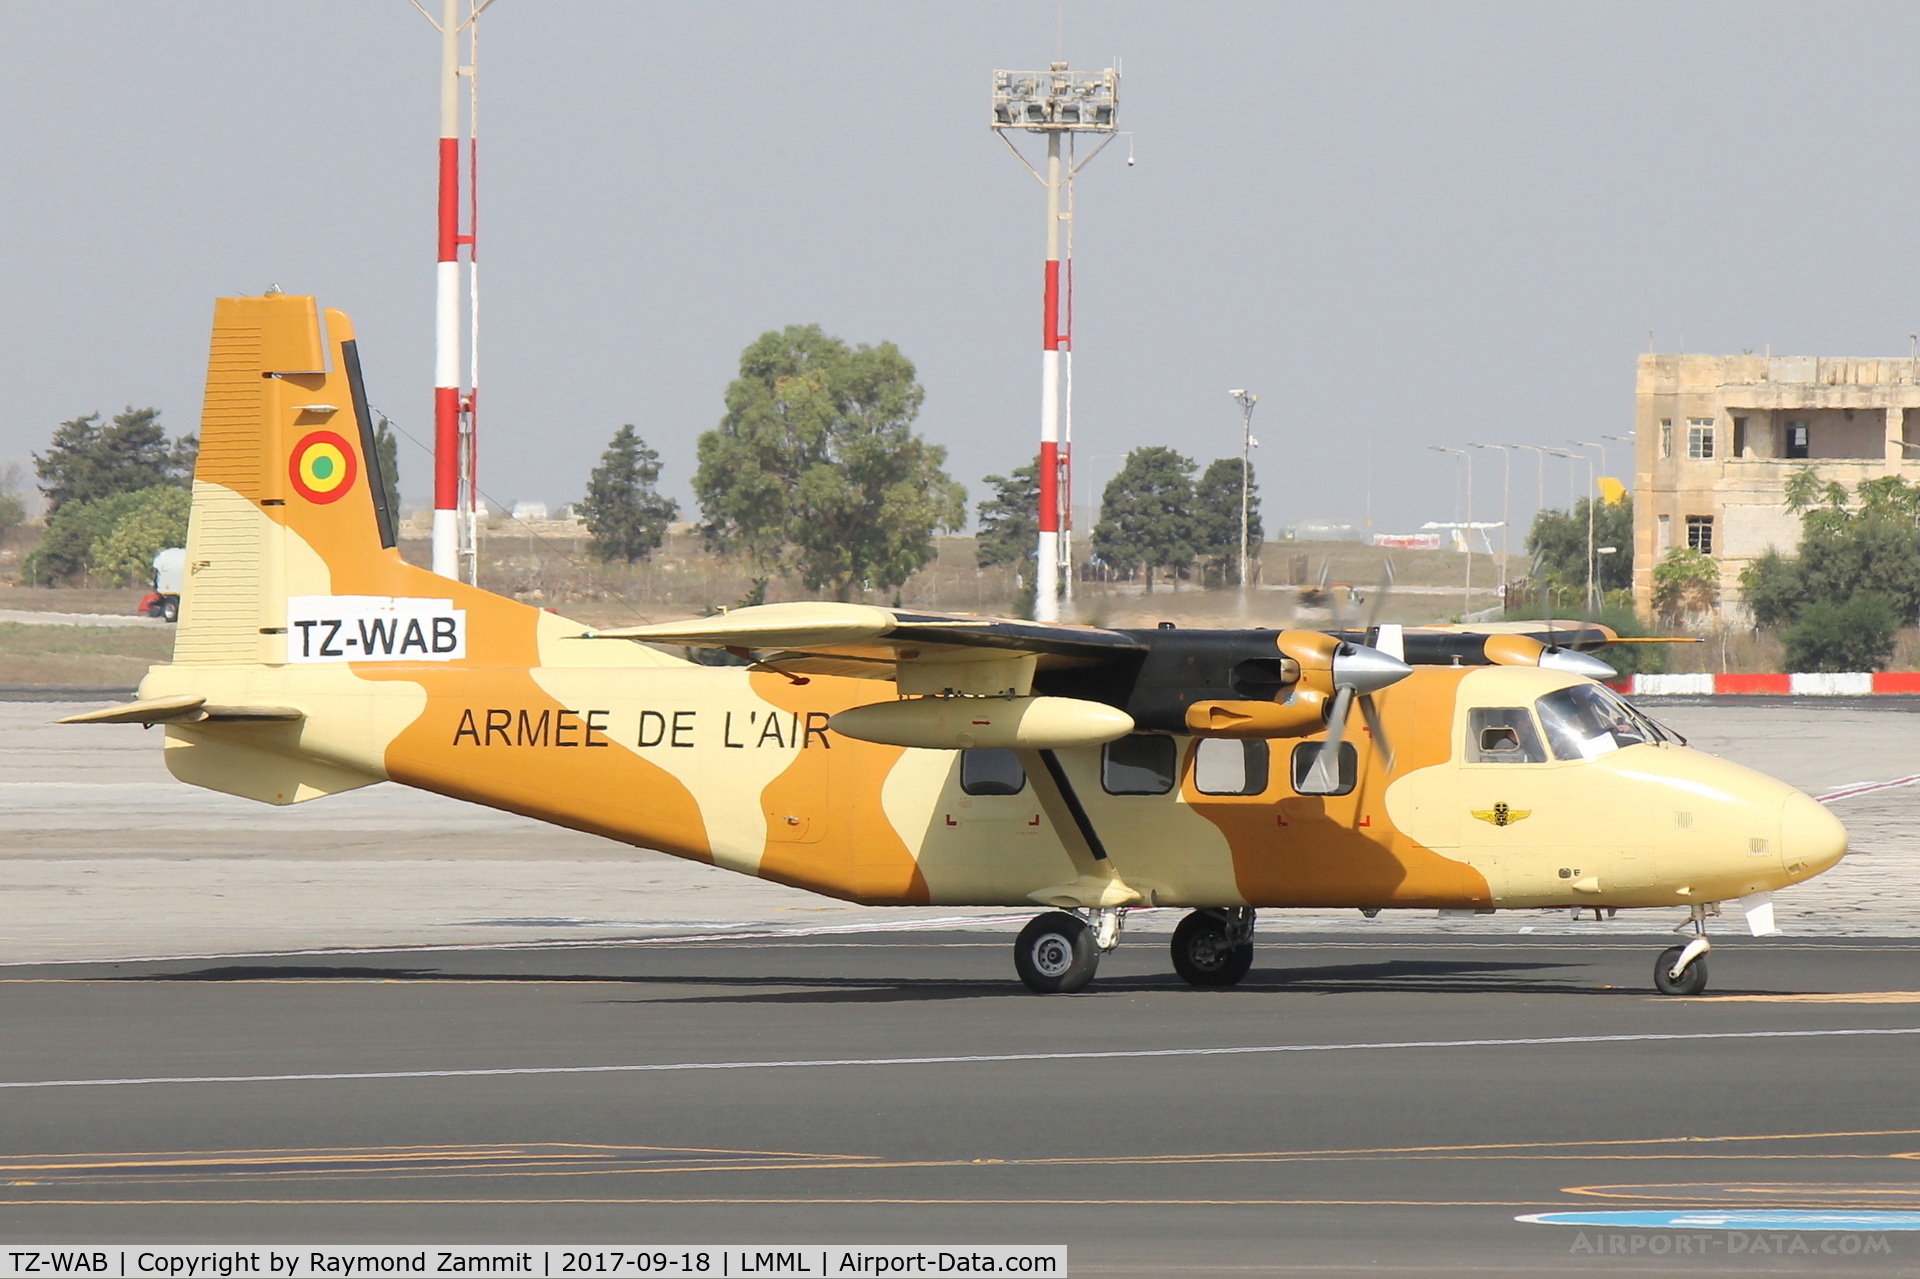 TZ-WAB, Harbin Y-12E C/N 095, Harbin Y-12E TZ-WAB Mali Air Force departing Malta on delivery flight.